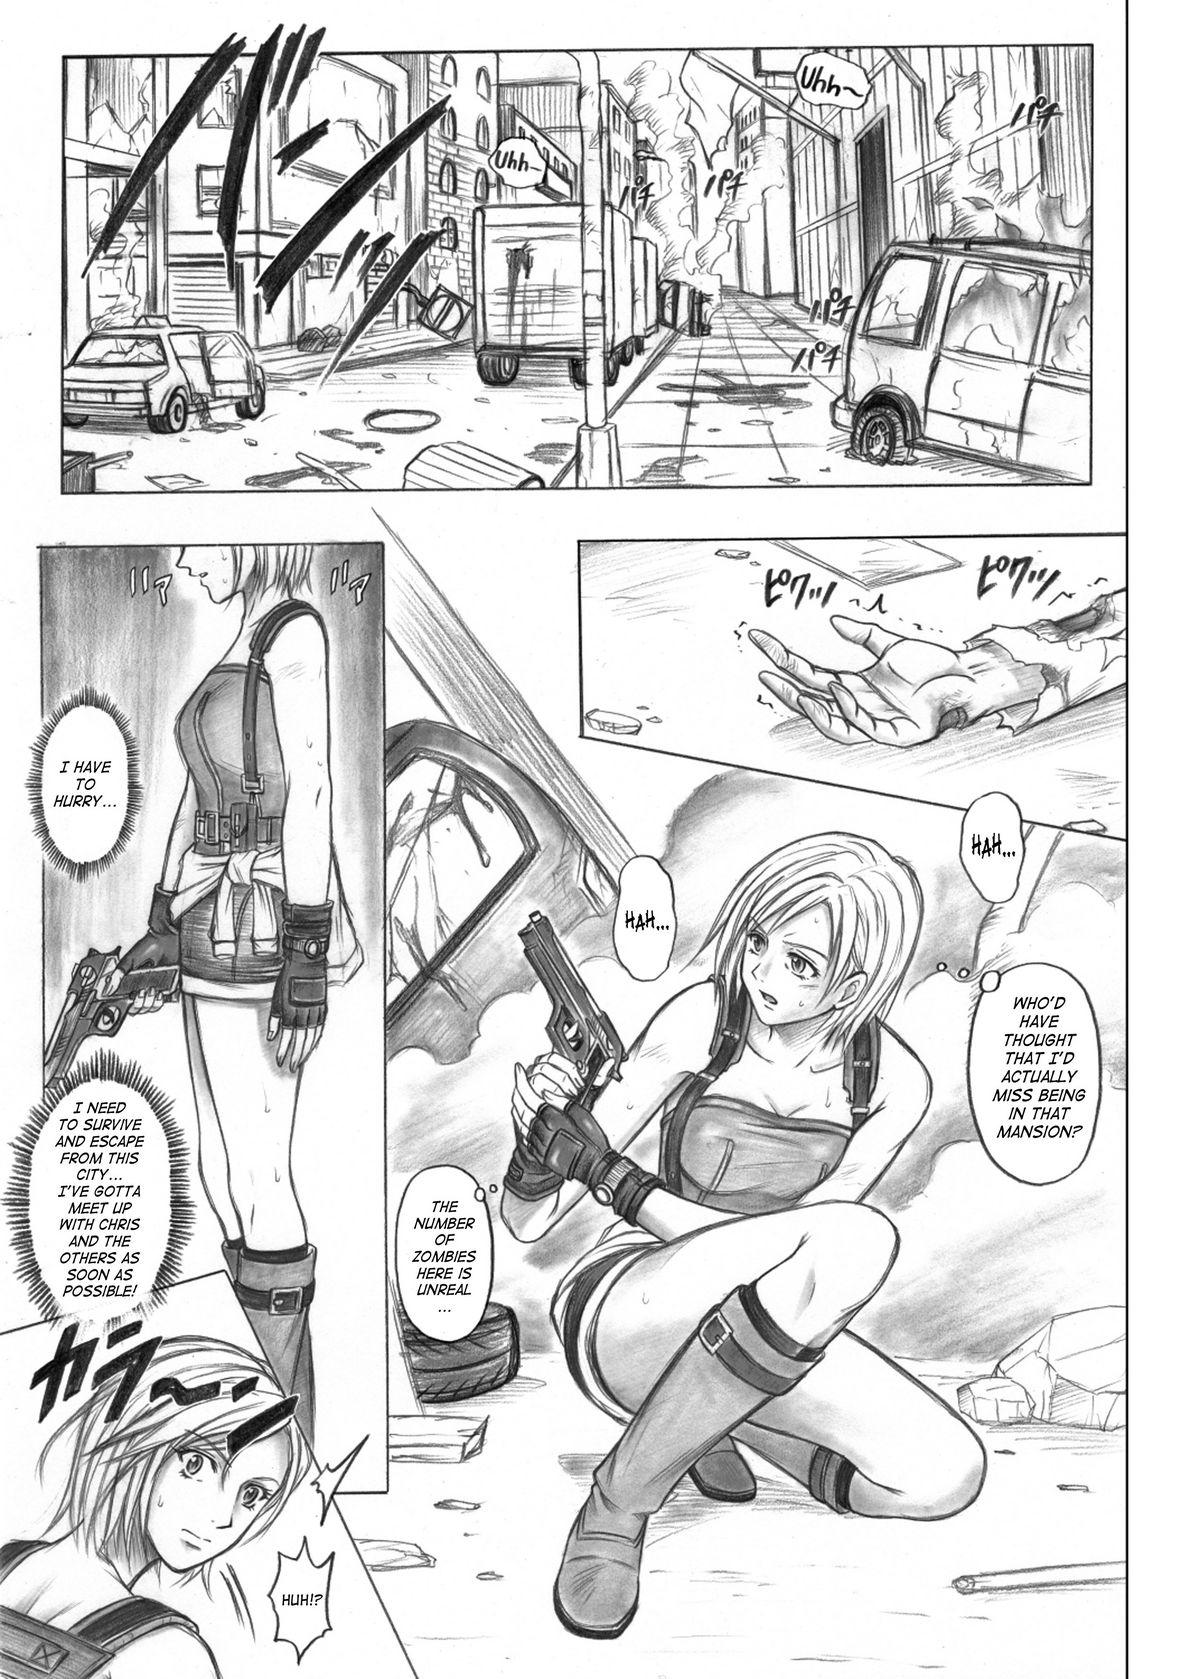 Her Monroeville - Resident evil Hungarian - Page 2